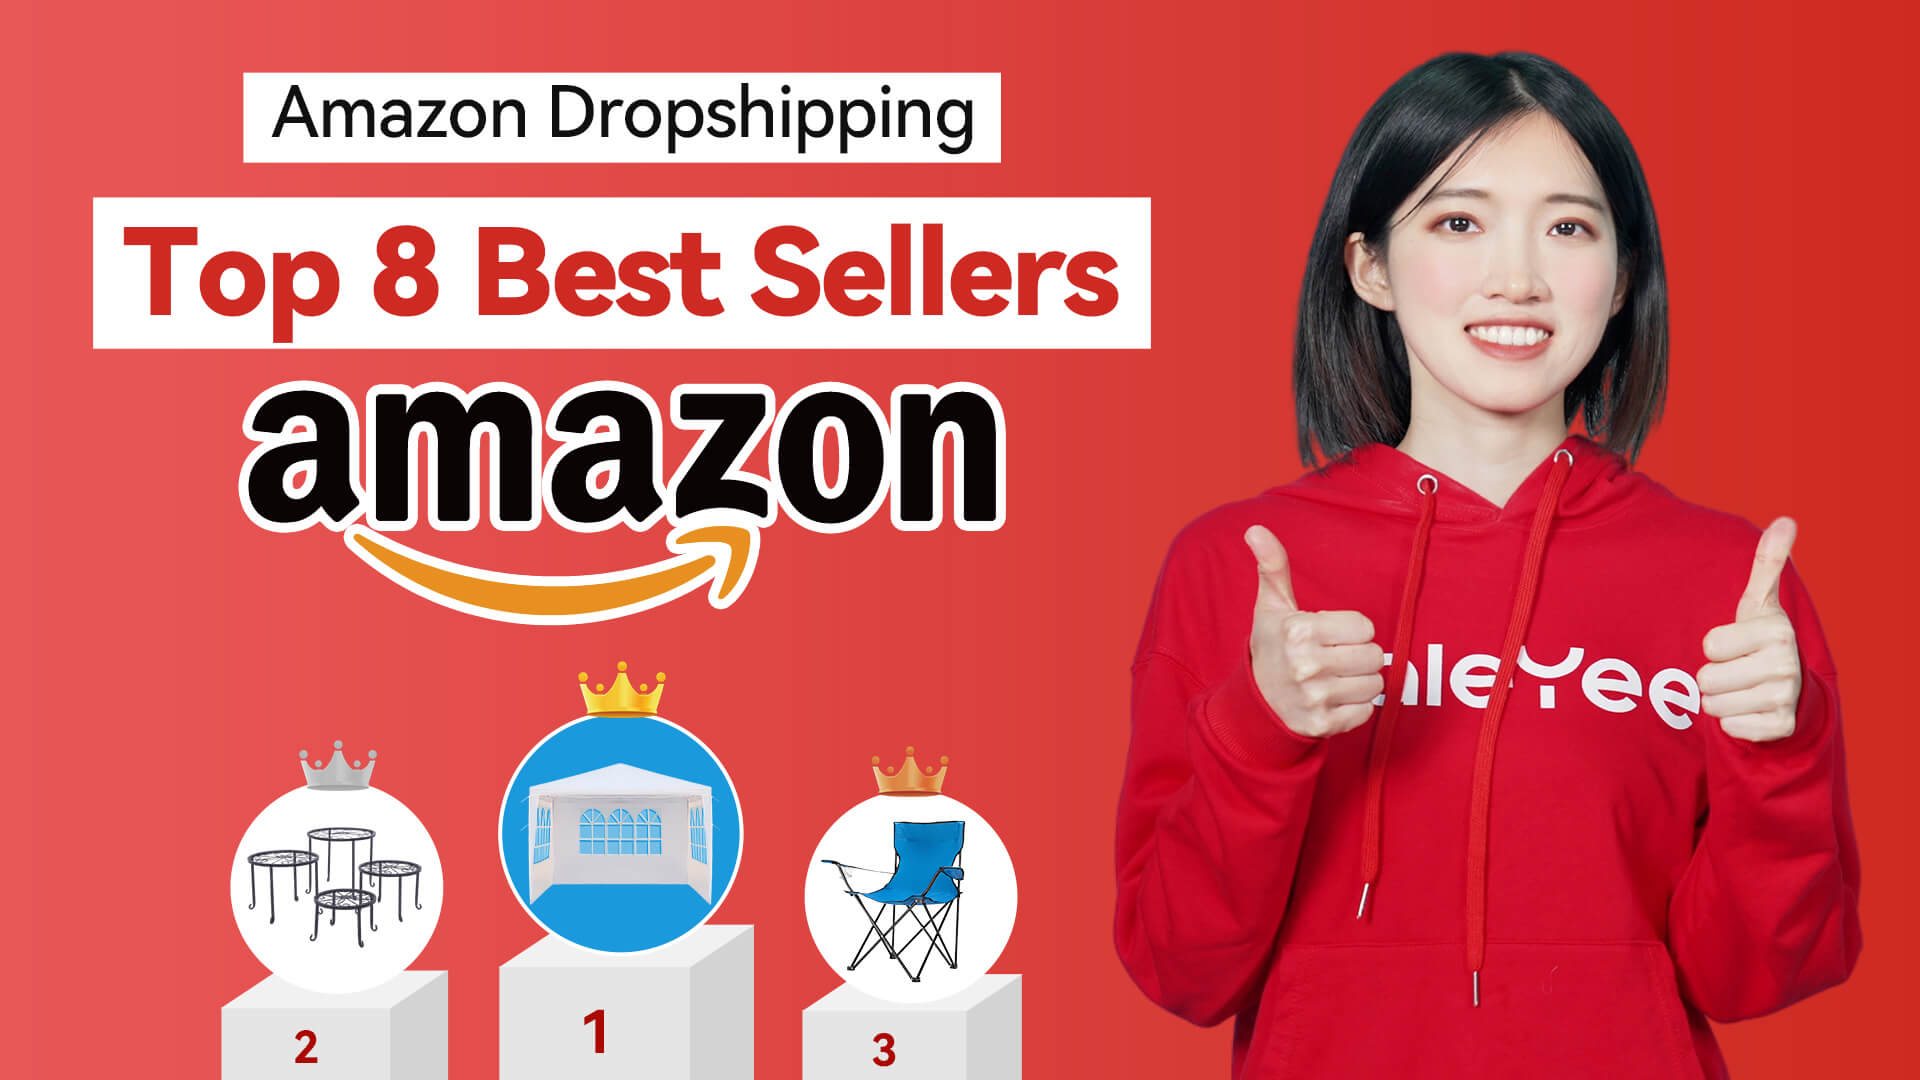 Top 8 Best-Selling Products to Dropship on Amazon